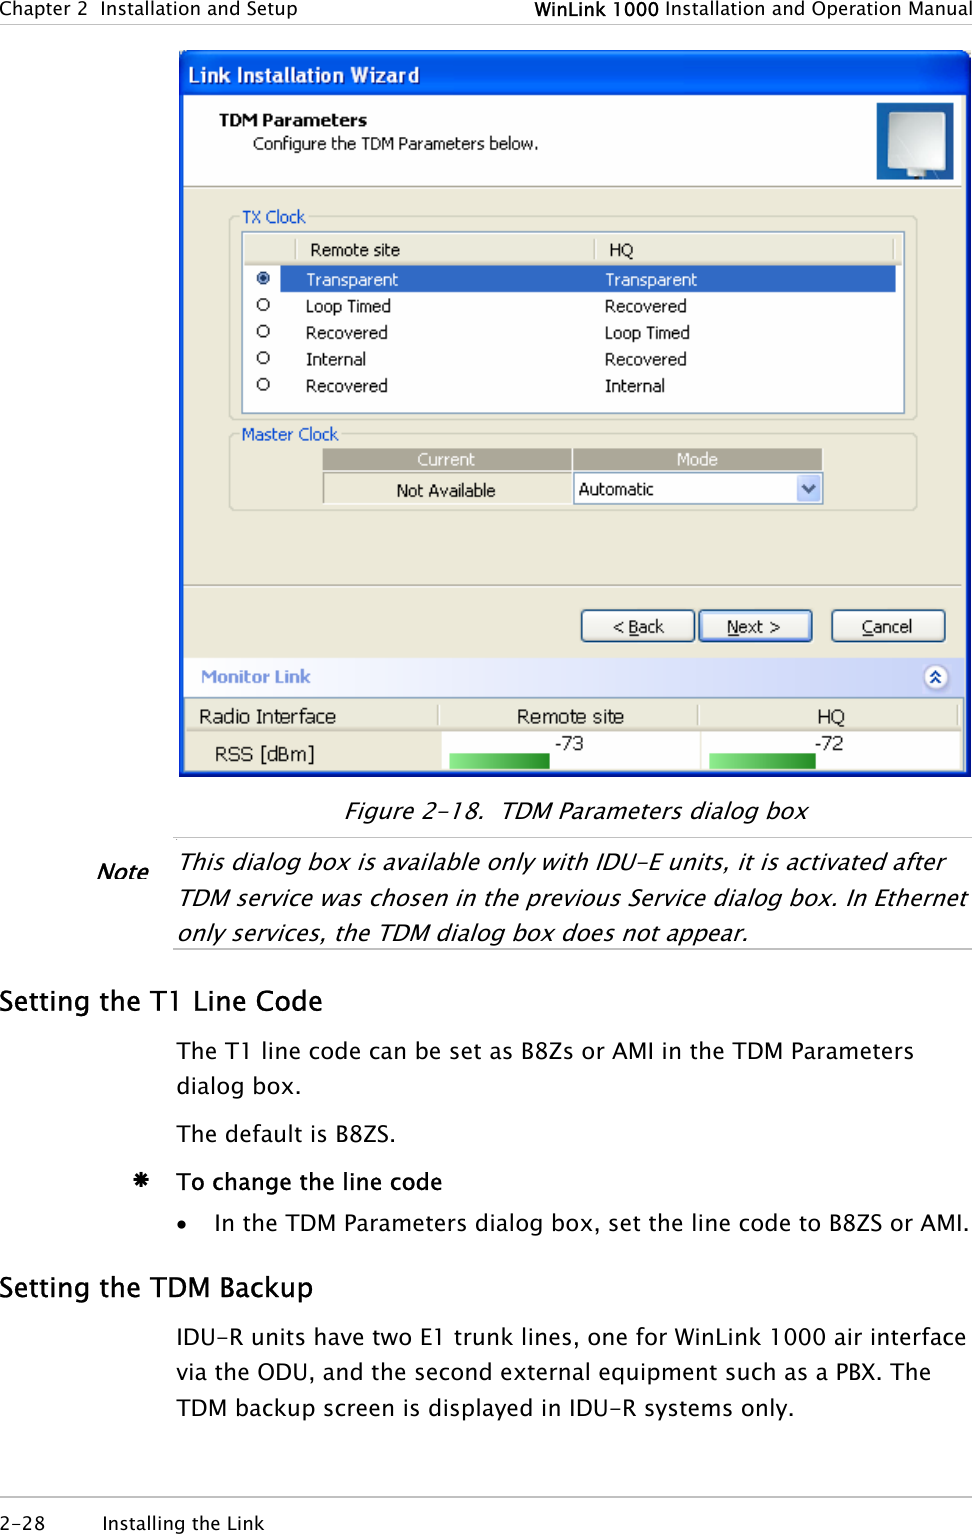 Chapter  2  Installation and Setup  WinLink 1000 Installation and Operation Manual  Figure  2-18.  TDM Parameters dialog box •  This dialog box is available only with IDU-E units, it is activated a ter TDM service was chosen in the previous Service dialog box. In Ethernet only services, the TDM dialog box does not appear. fNote Setting the T1 Line Code The T1 line code can be set as B8Zs or AMI in the TDM Parameters dialog box. The default is B8ZS. Æ To change the line code • In the TDM Parameters dialog box, set the line code to B8ZS or AMI. Setting the TDM Backup IDU-R units have two E1 trunk lines, one for WinLink 1000 air interface via the ODU, and the second external equipment such as a PBX. The TDM backup screen is displayed in IDU-R systems only. 2-28 Installing the Link   